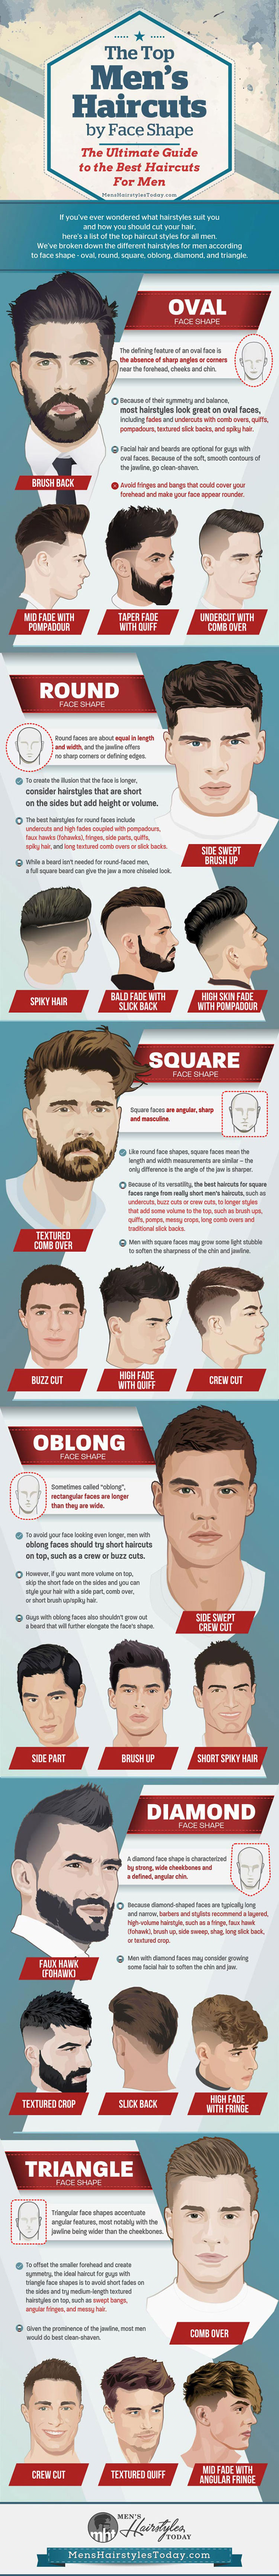 the best men's haircut for your face shape | (what hairstyle